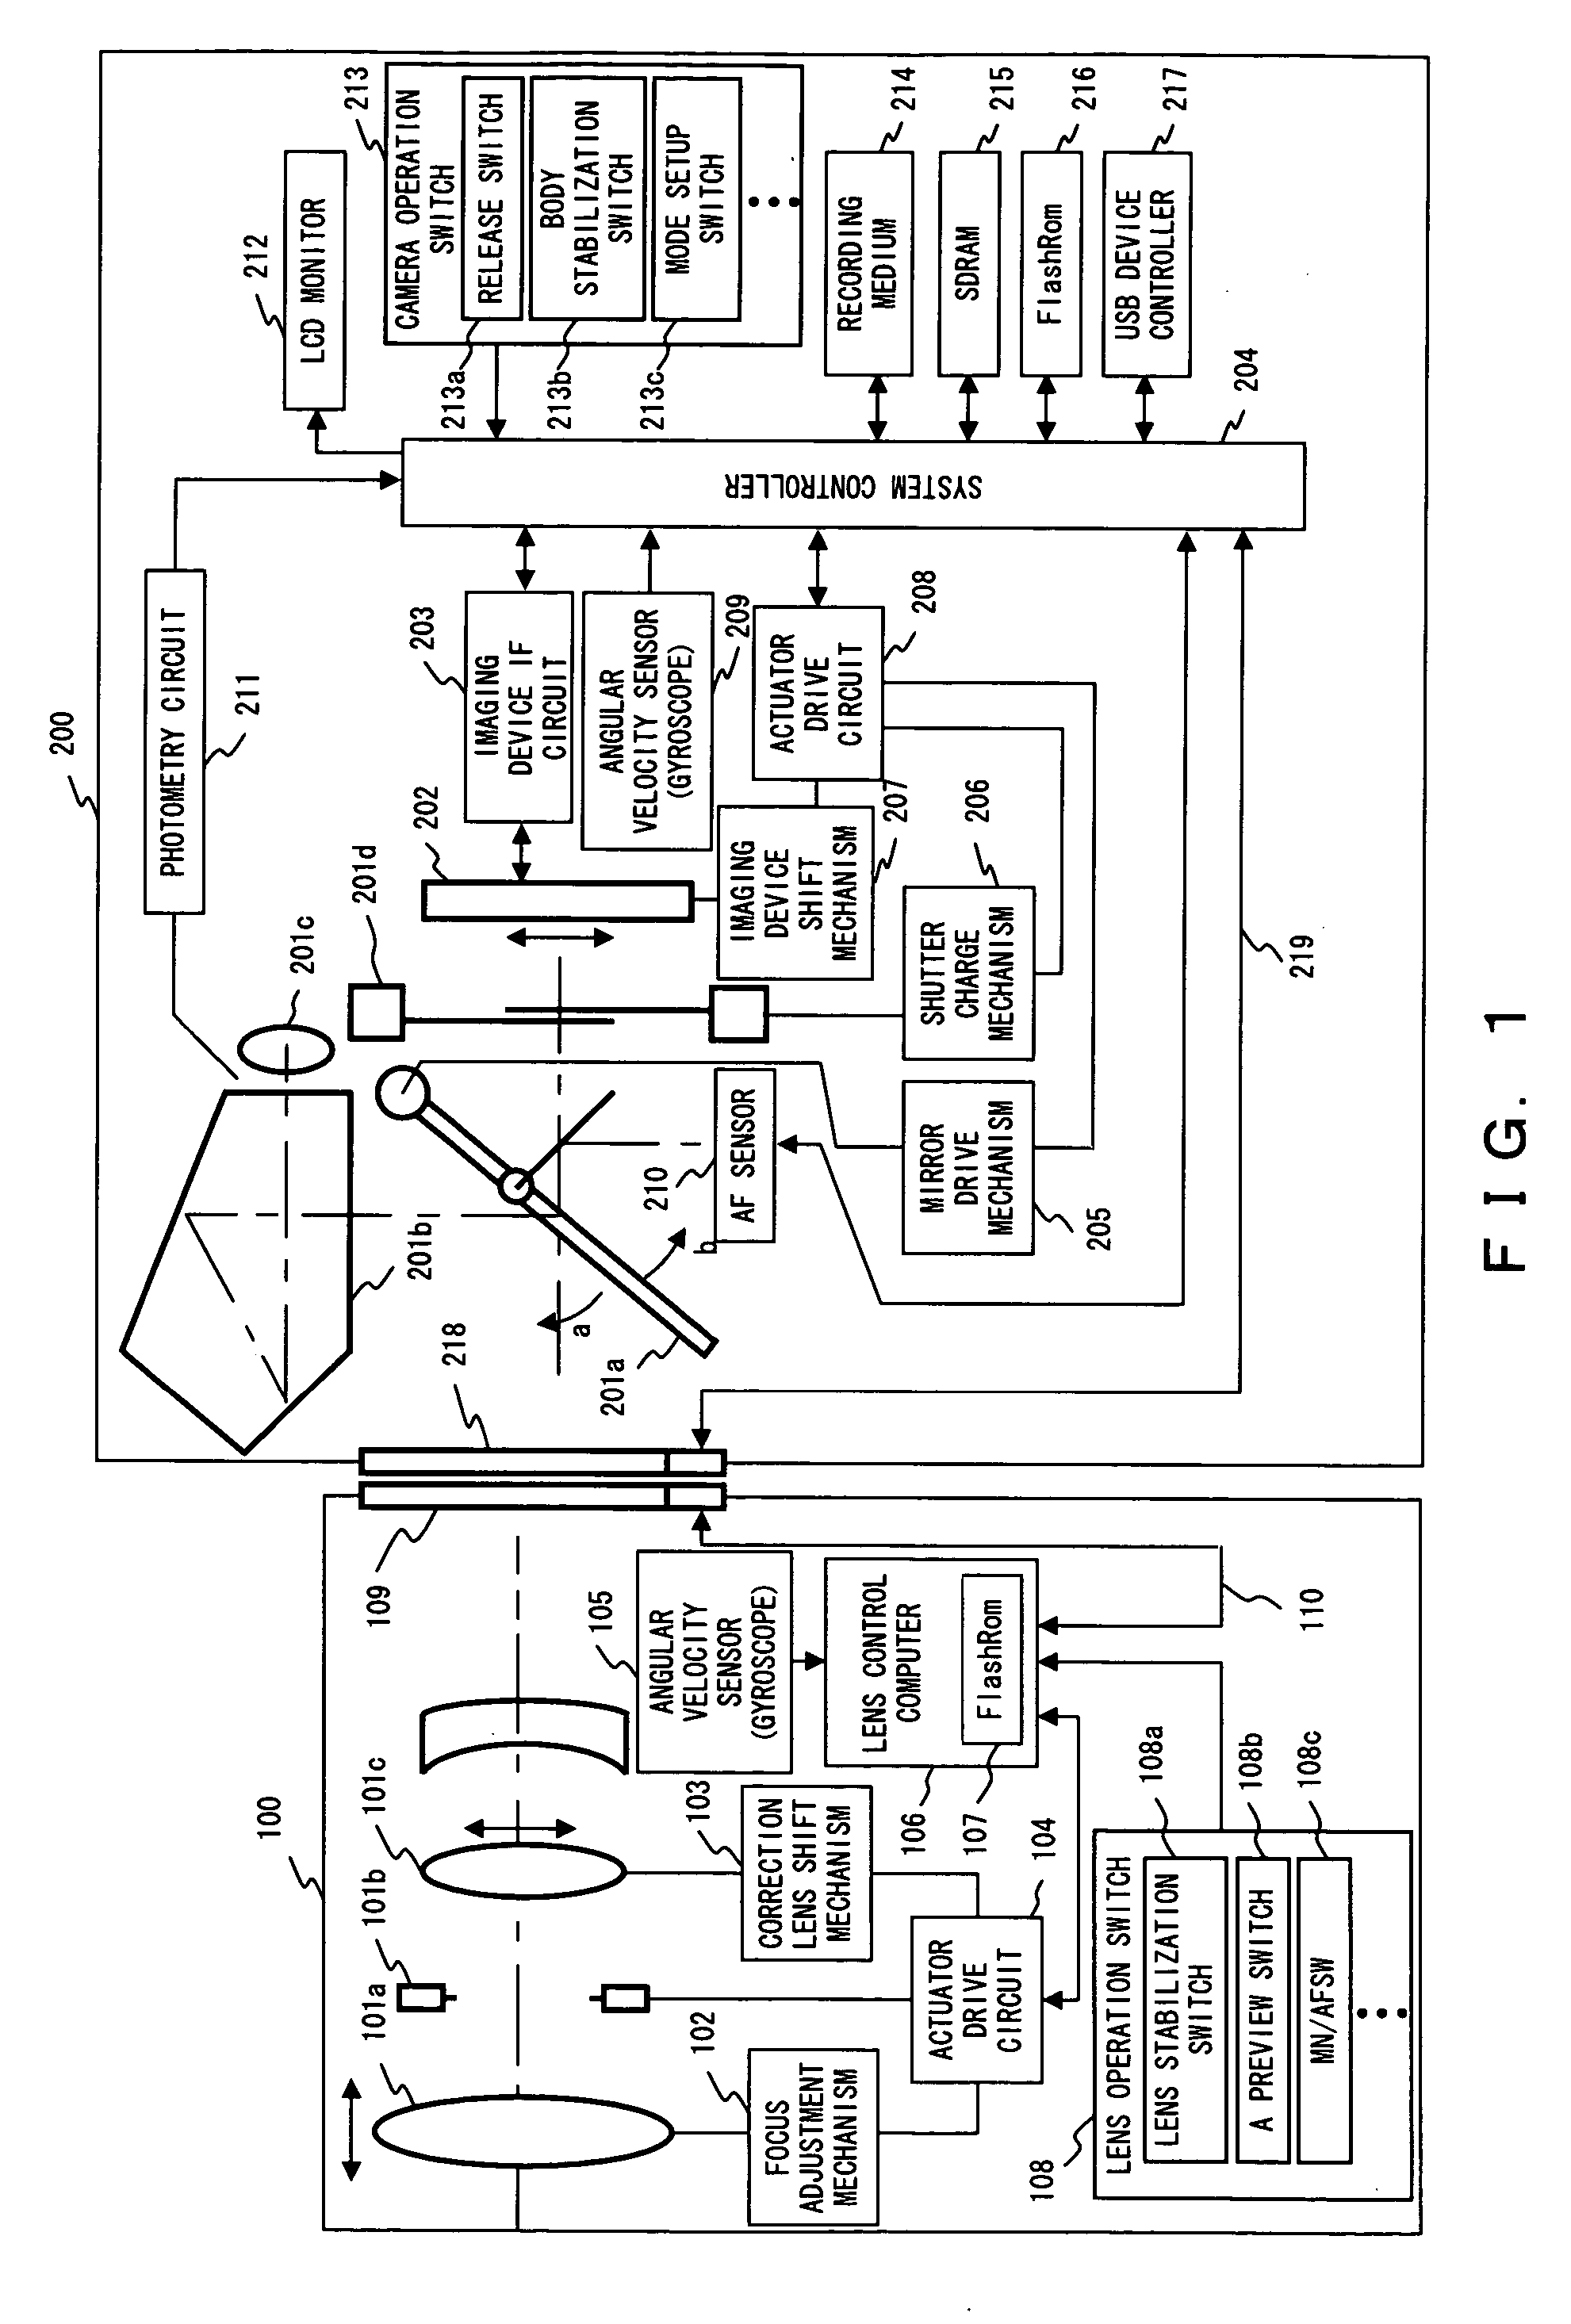 Camera system equipped with camera shake correction function